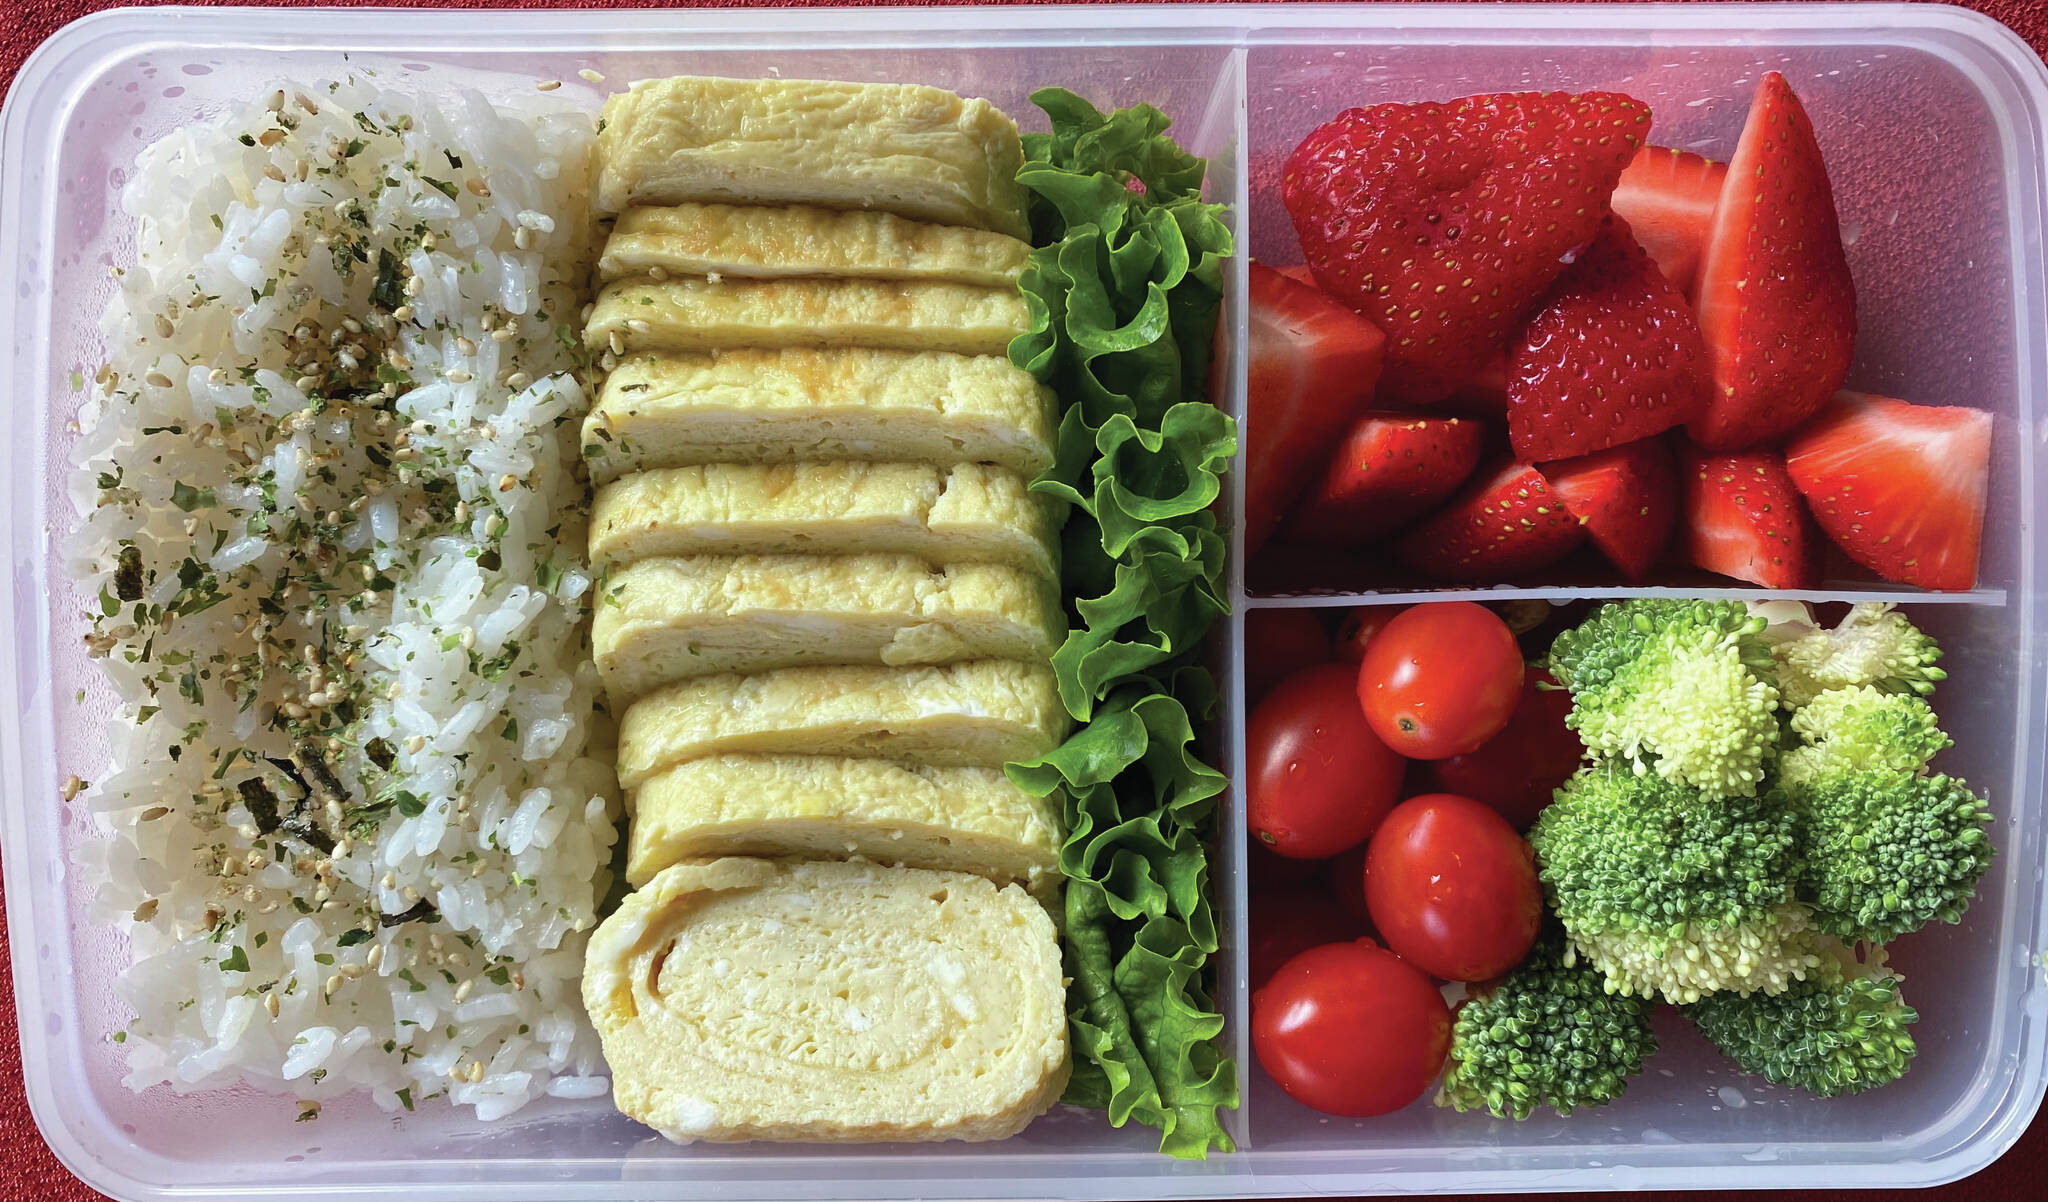 Photo by Tressa Dale/Peninsula Clarion
This bento box includes rice, fruit, vegetables and tomagoyaki, or Japanese rolled omelet.